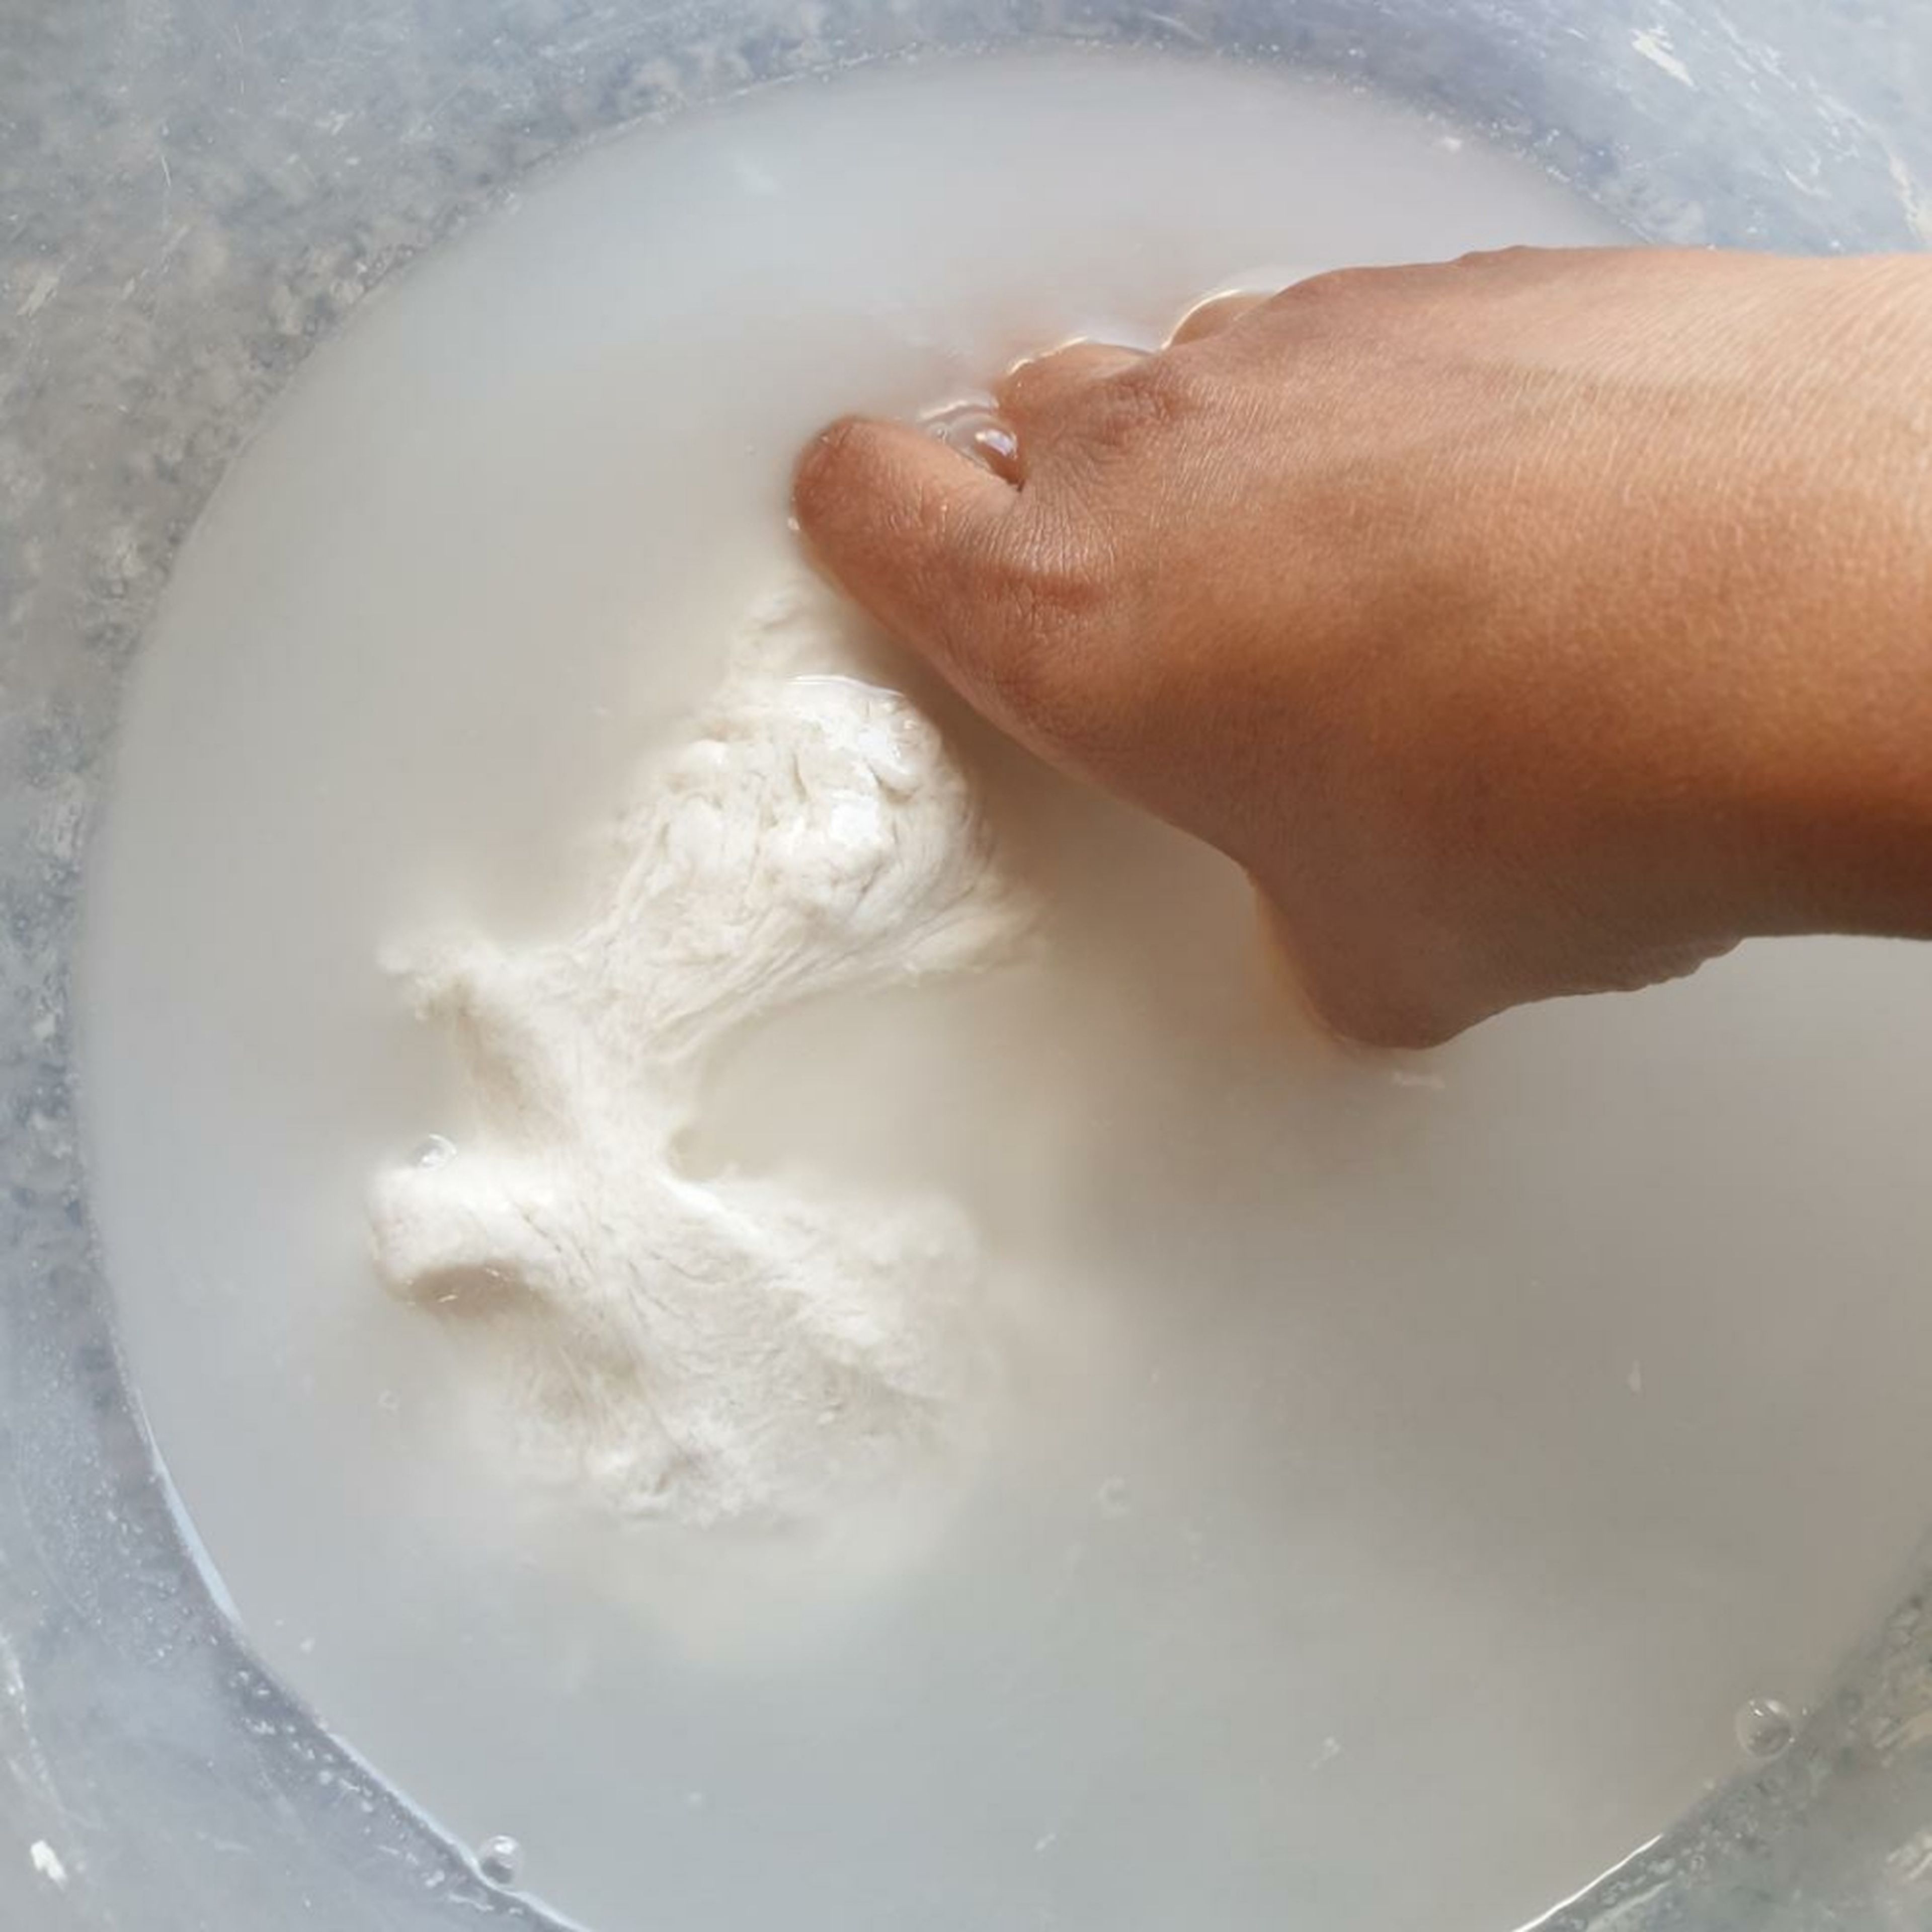 Wash the dough using the water, until you are left with the gluten and throwaway the gluten.